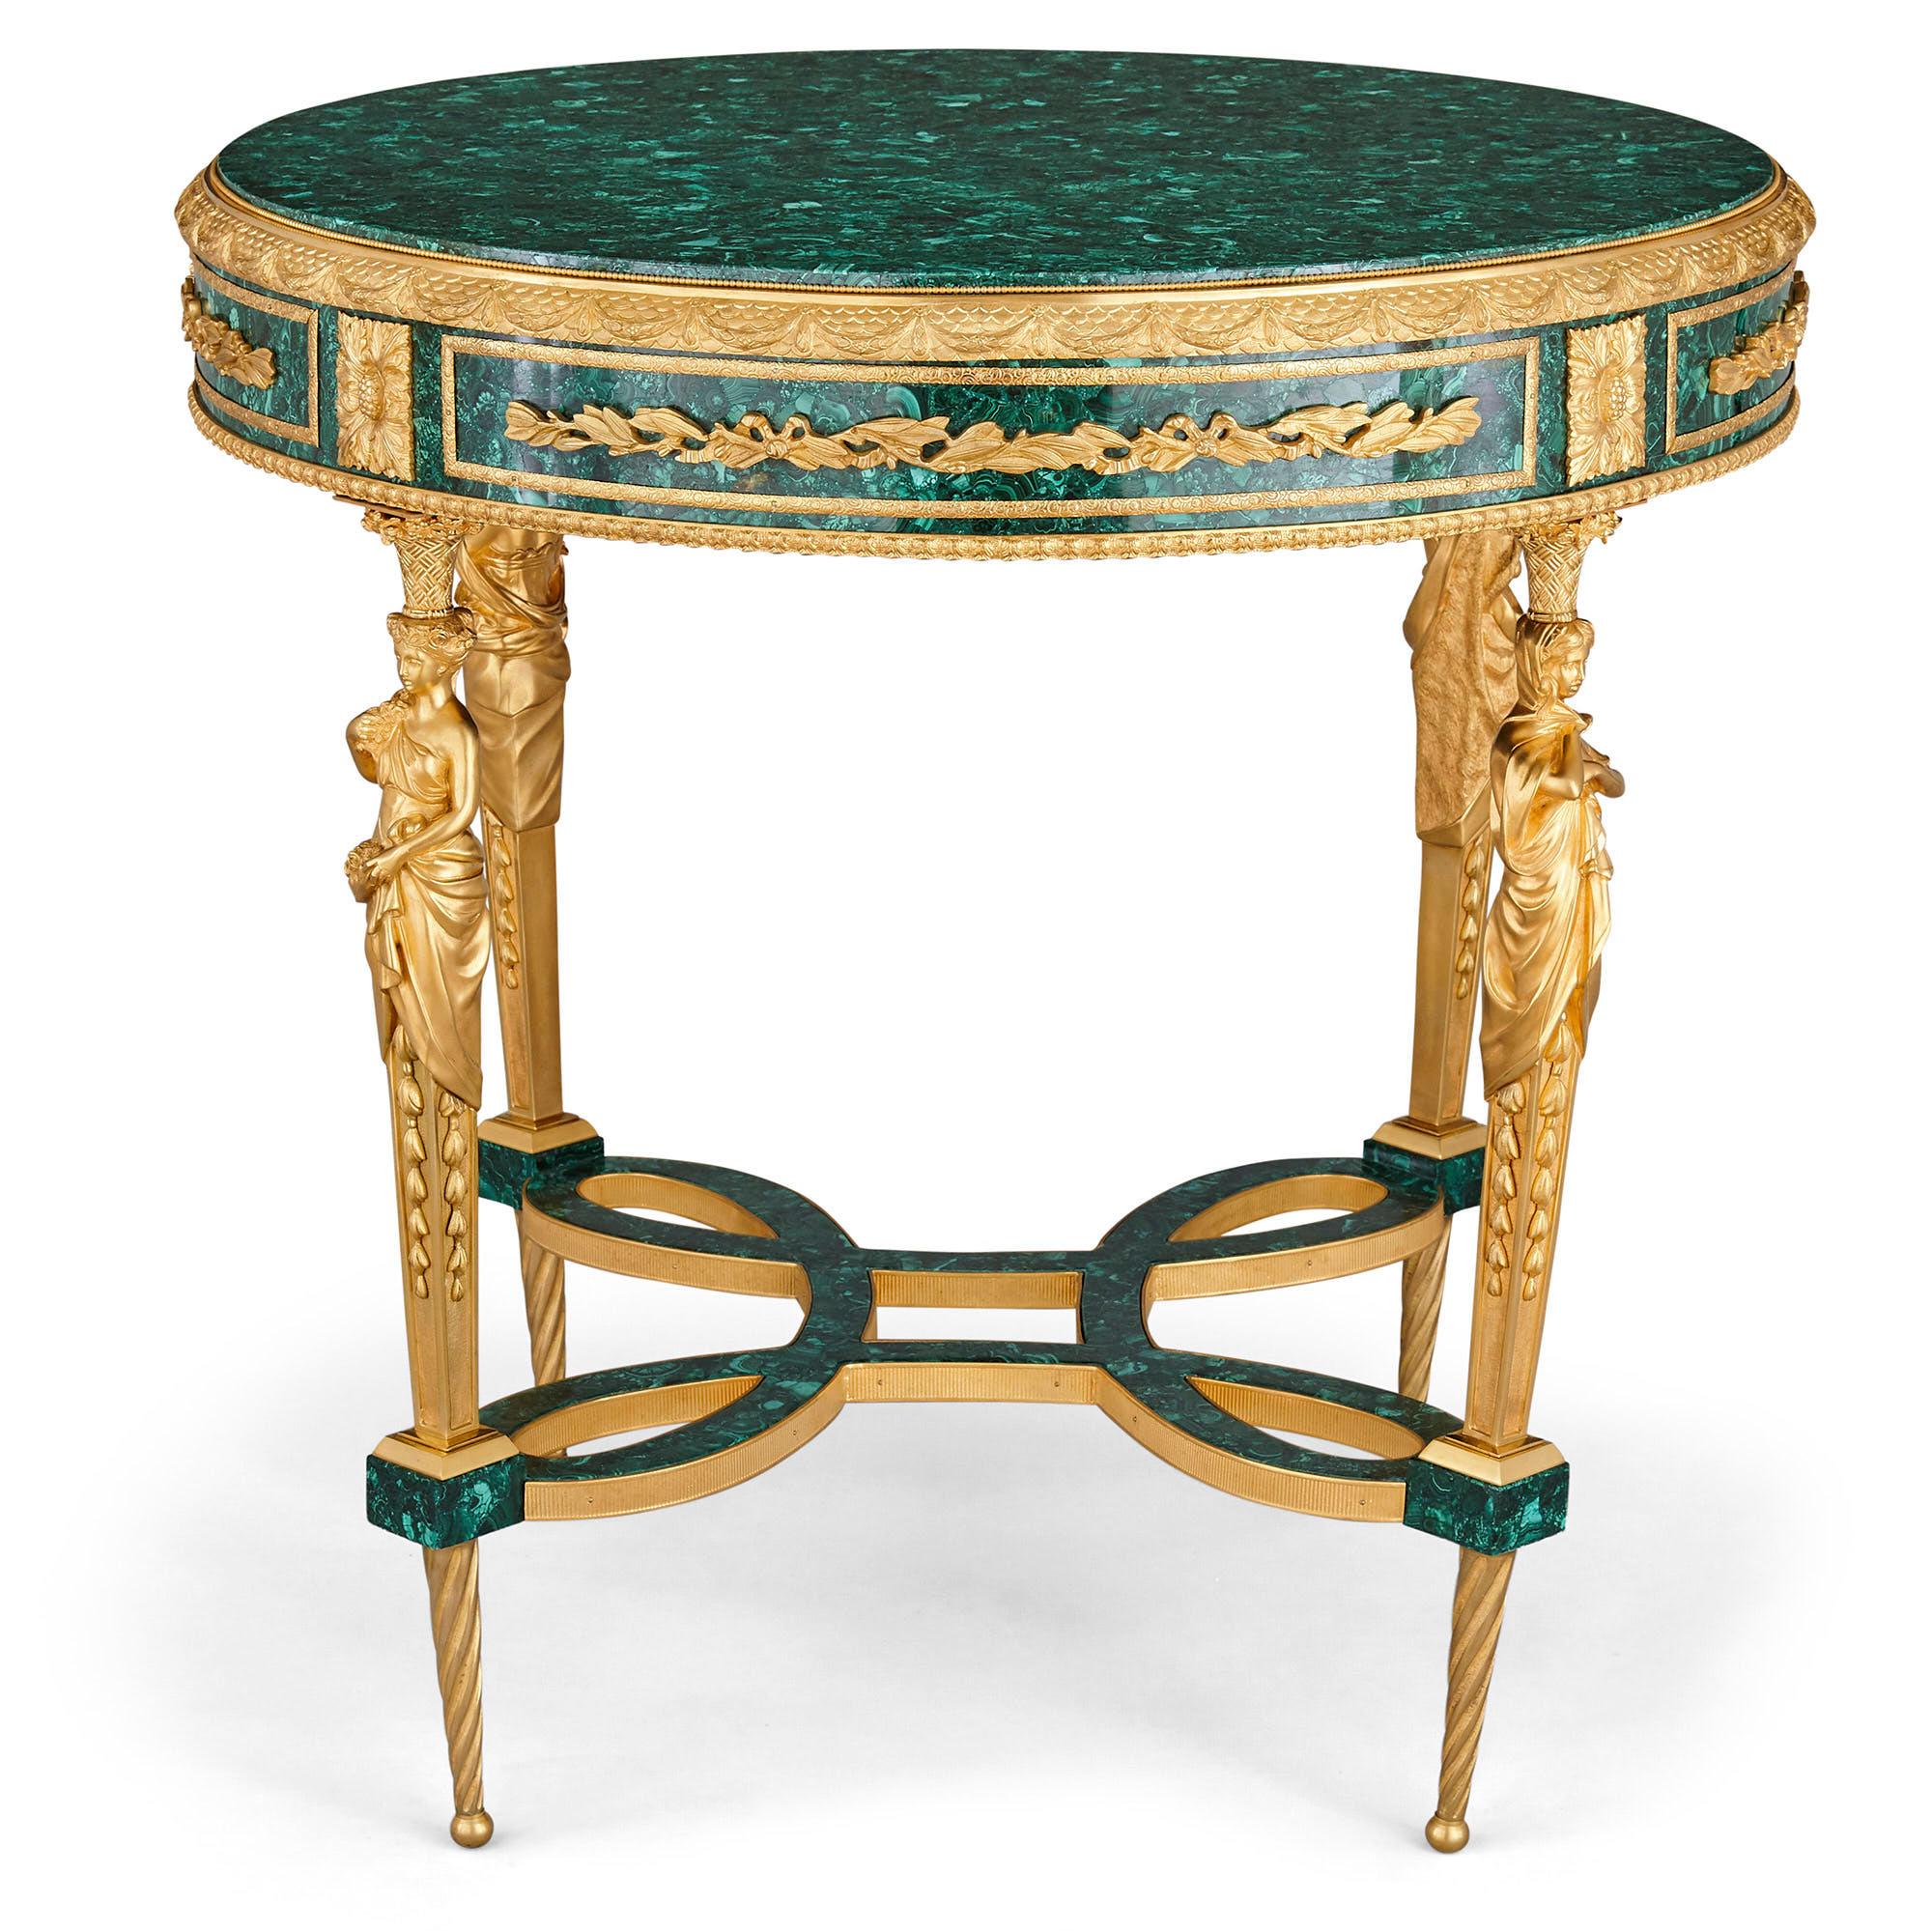 Two neoclassical Louis XVI style malachite and gilt bronze guéridons
French, 20th century
Dimensions: Height 79cm, diameter 80cm

This pair of circular side tables are crafted from ormolu and malachite, designed in the Neoclassical Louis XVI style,